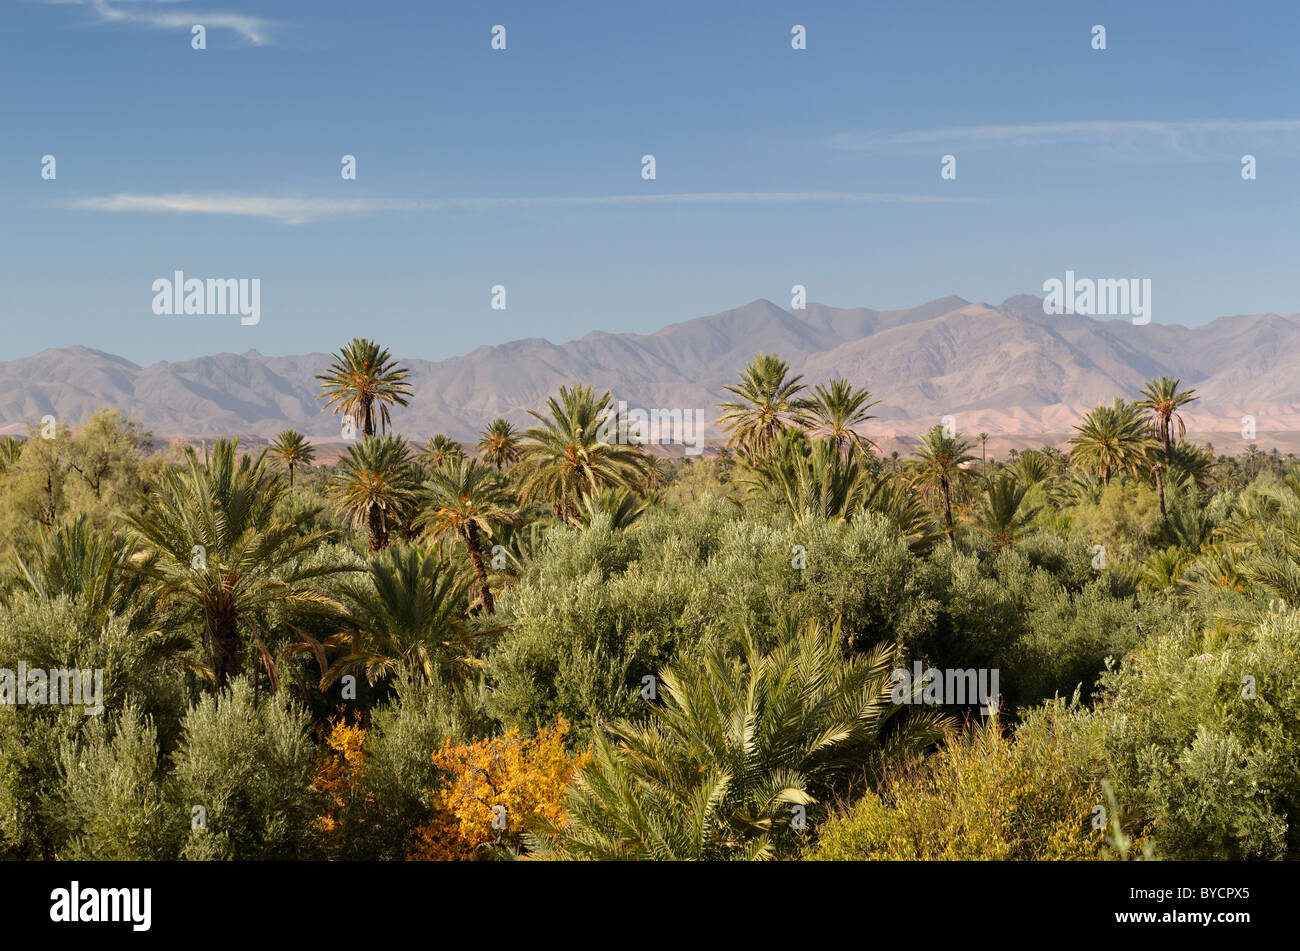 View of High Atlas mountains and the Skoura oasis Palm tree grove from Kasbah Ben Moro Morocco Stock Photo